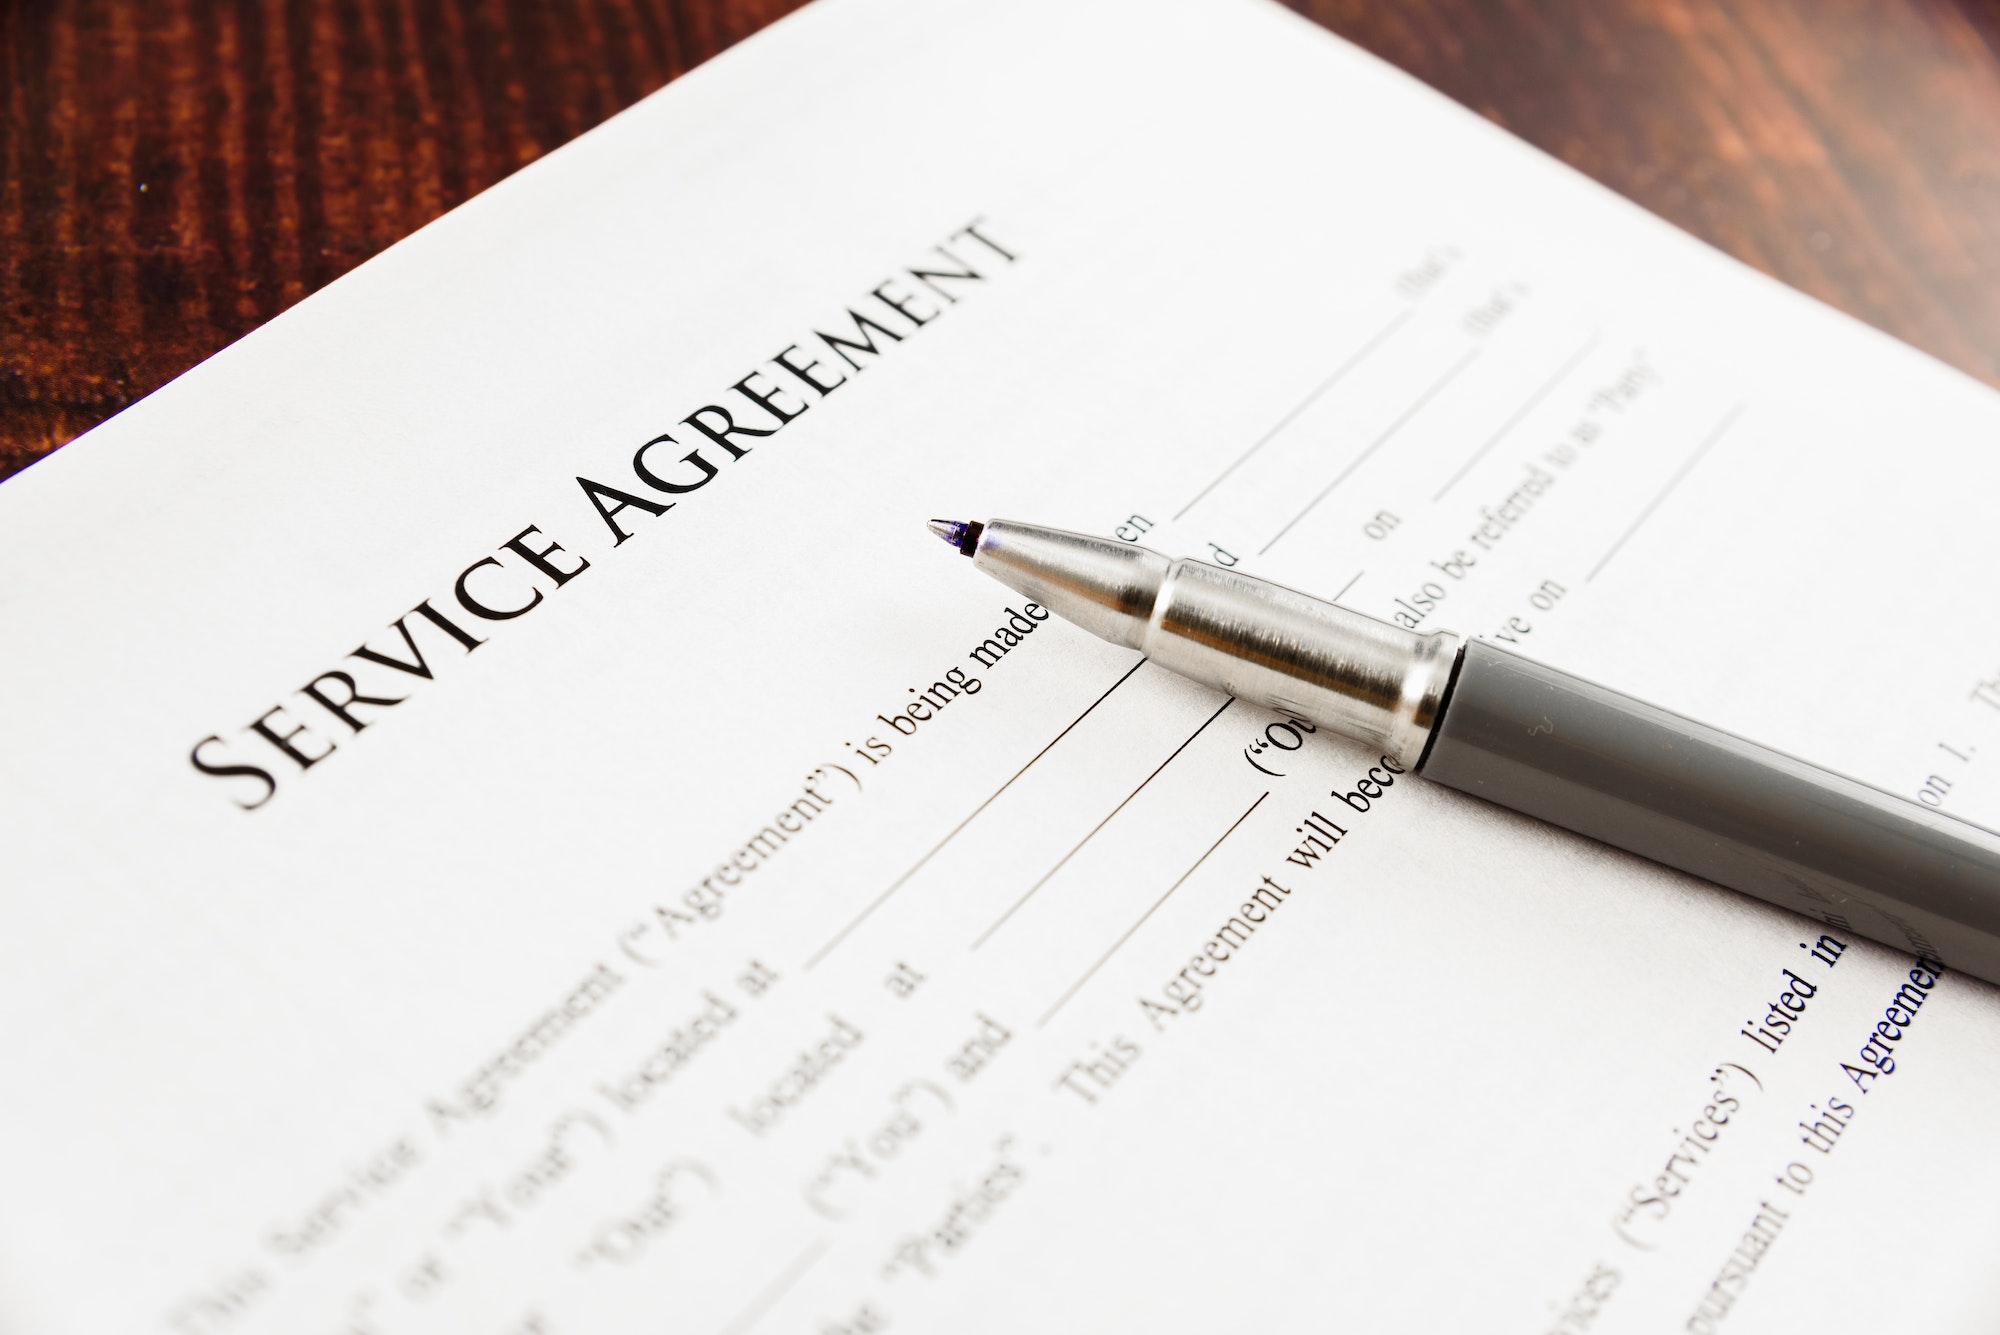 Concept Image of a Service agreement written by a lawyer.